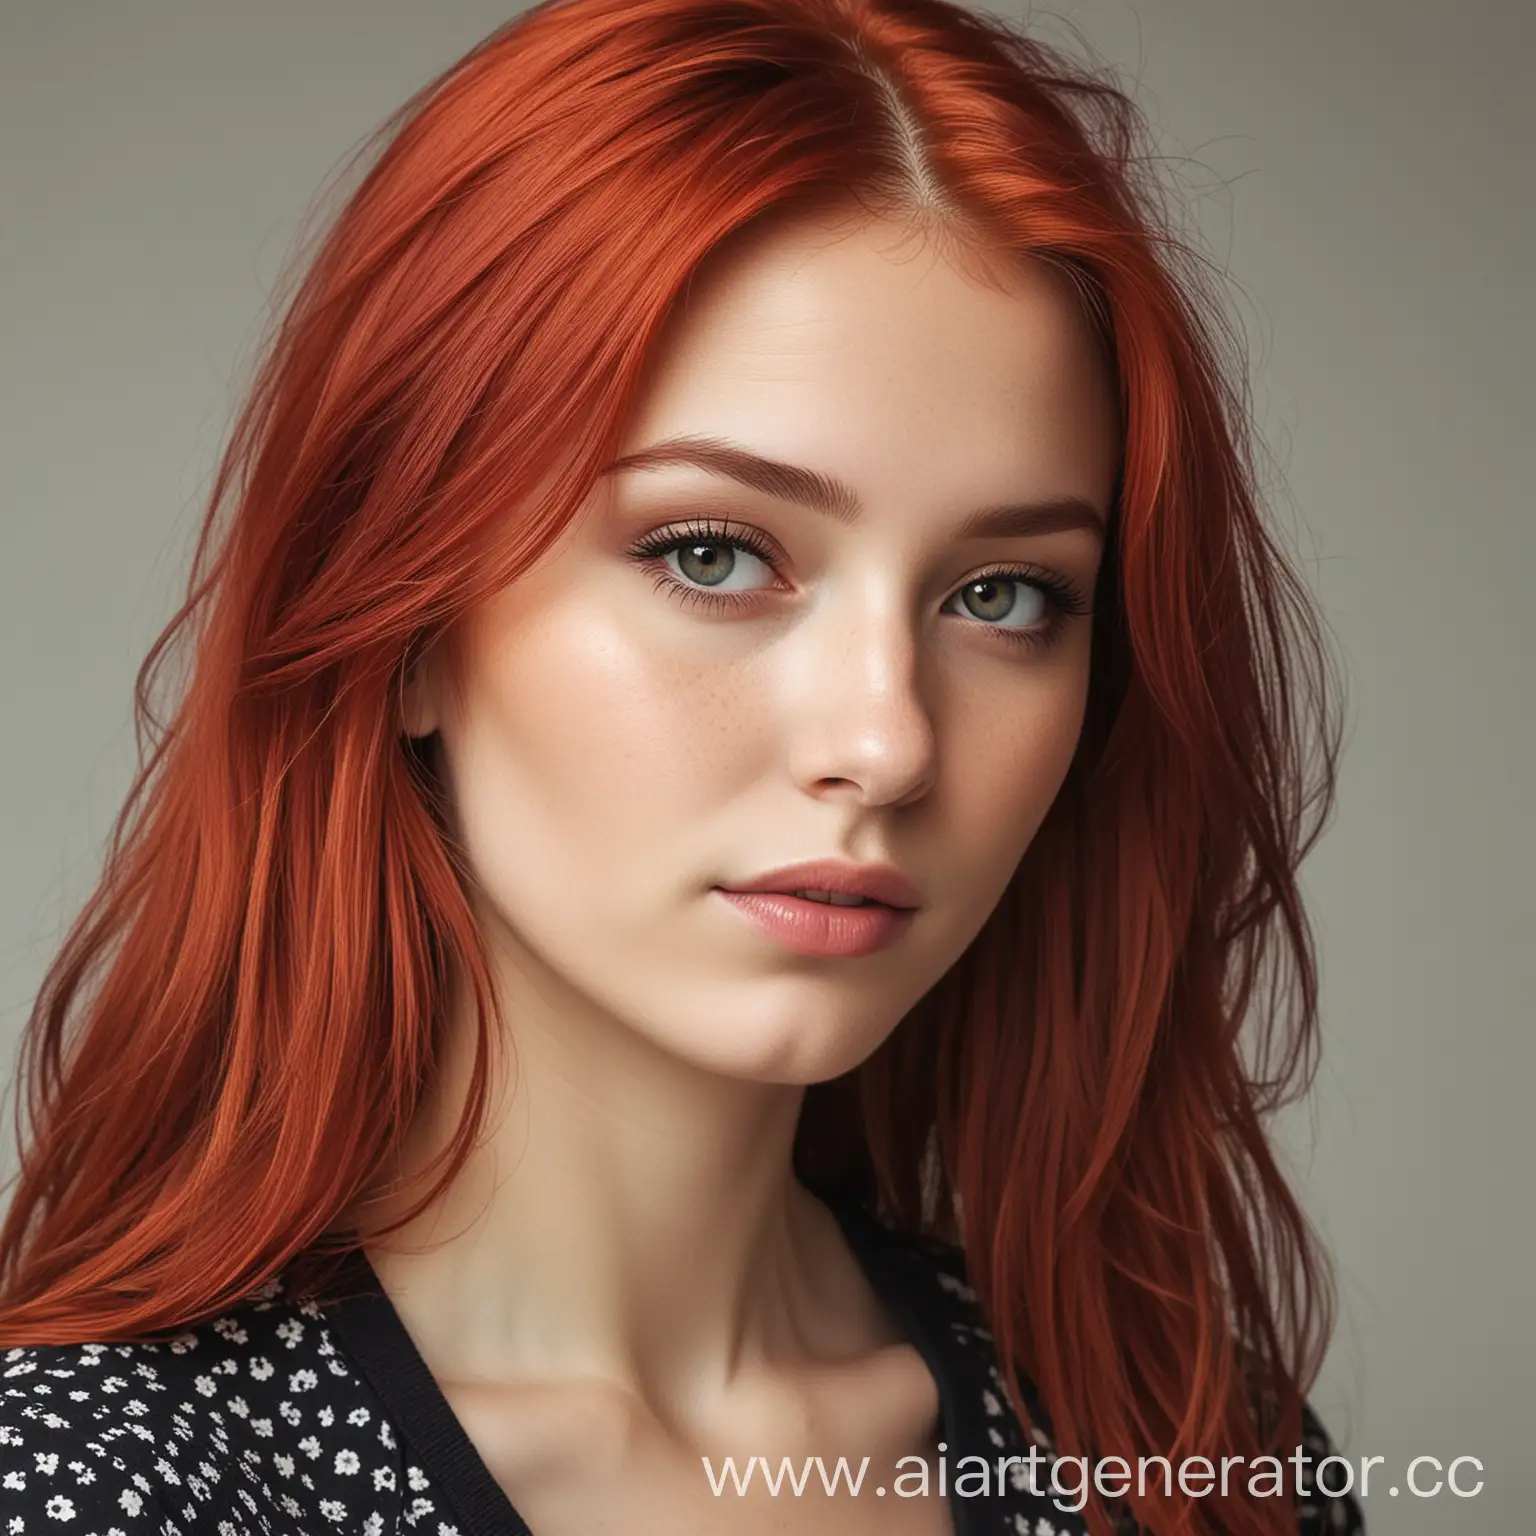 Vibrant-RedHaired-Girl-Portrait